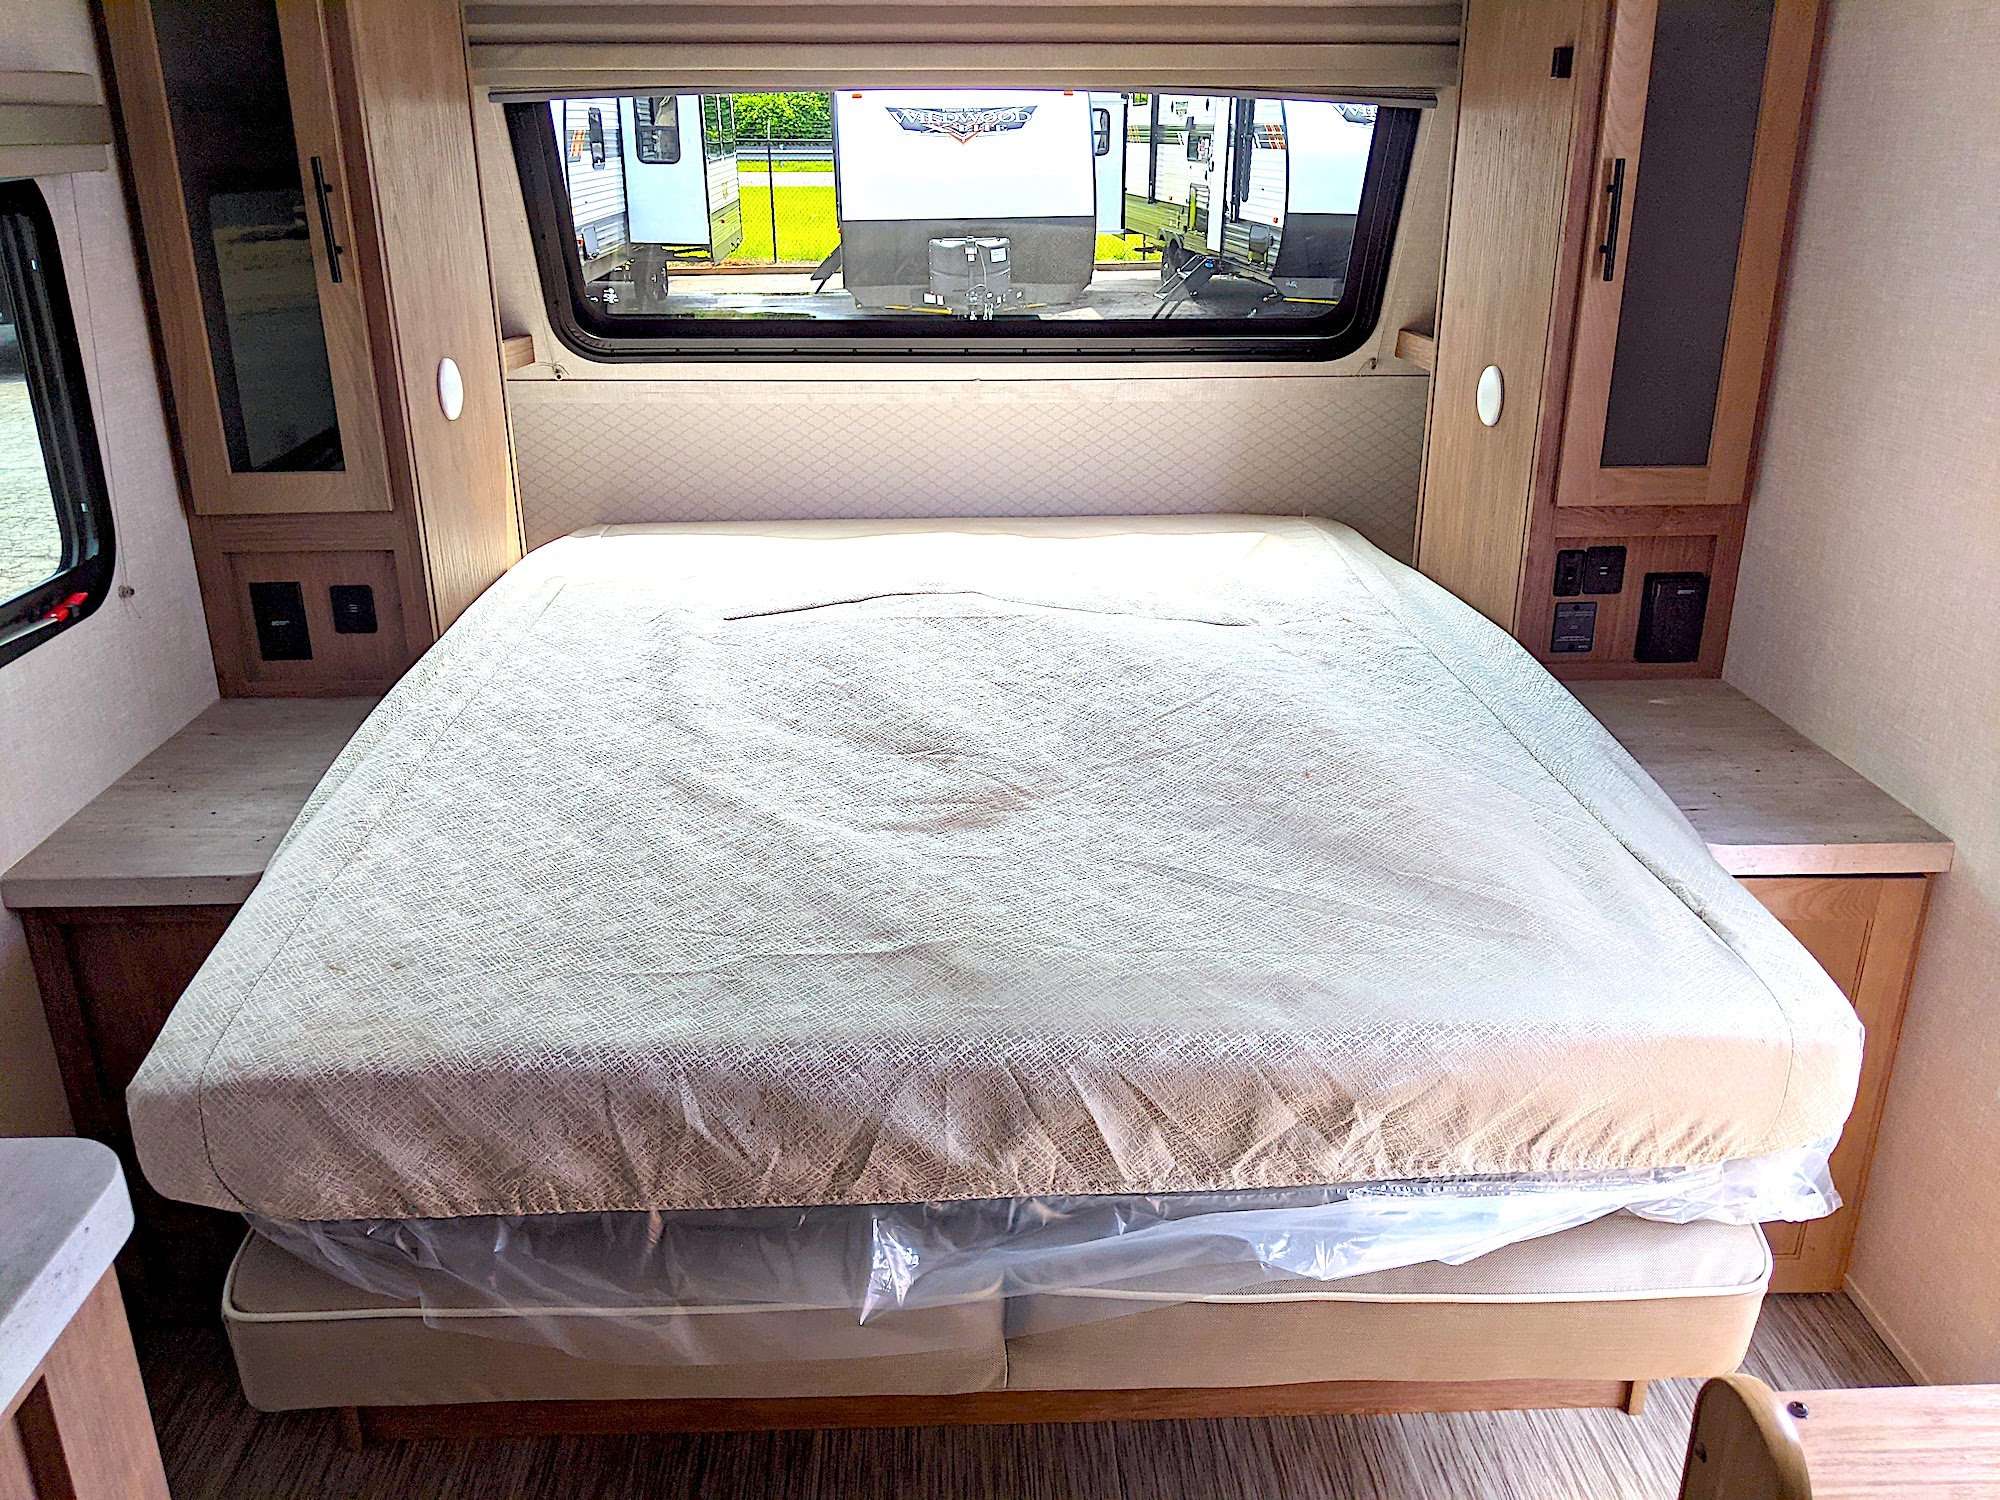 Is an RV Murphy Bed Worth It?